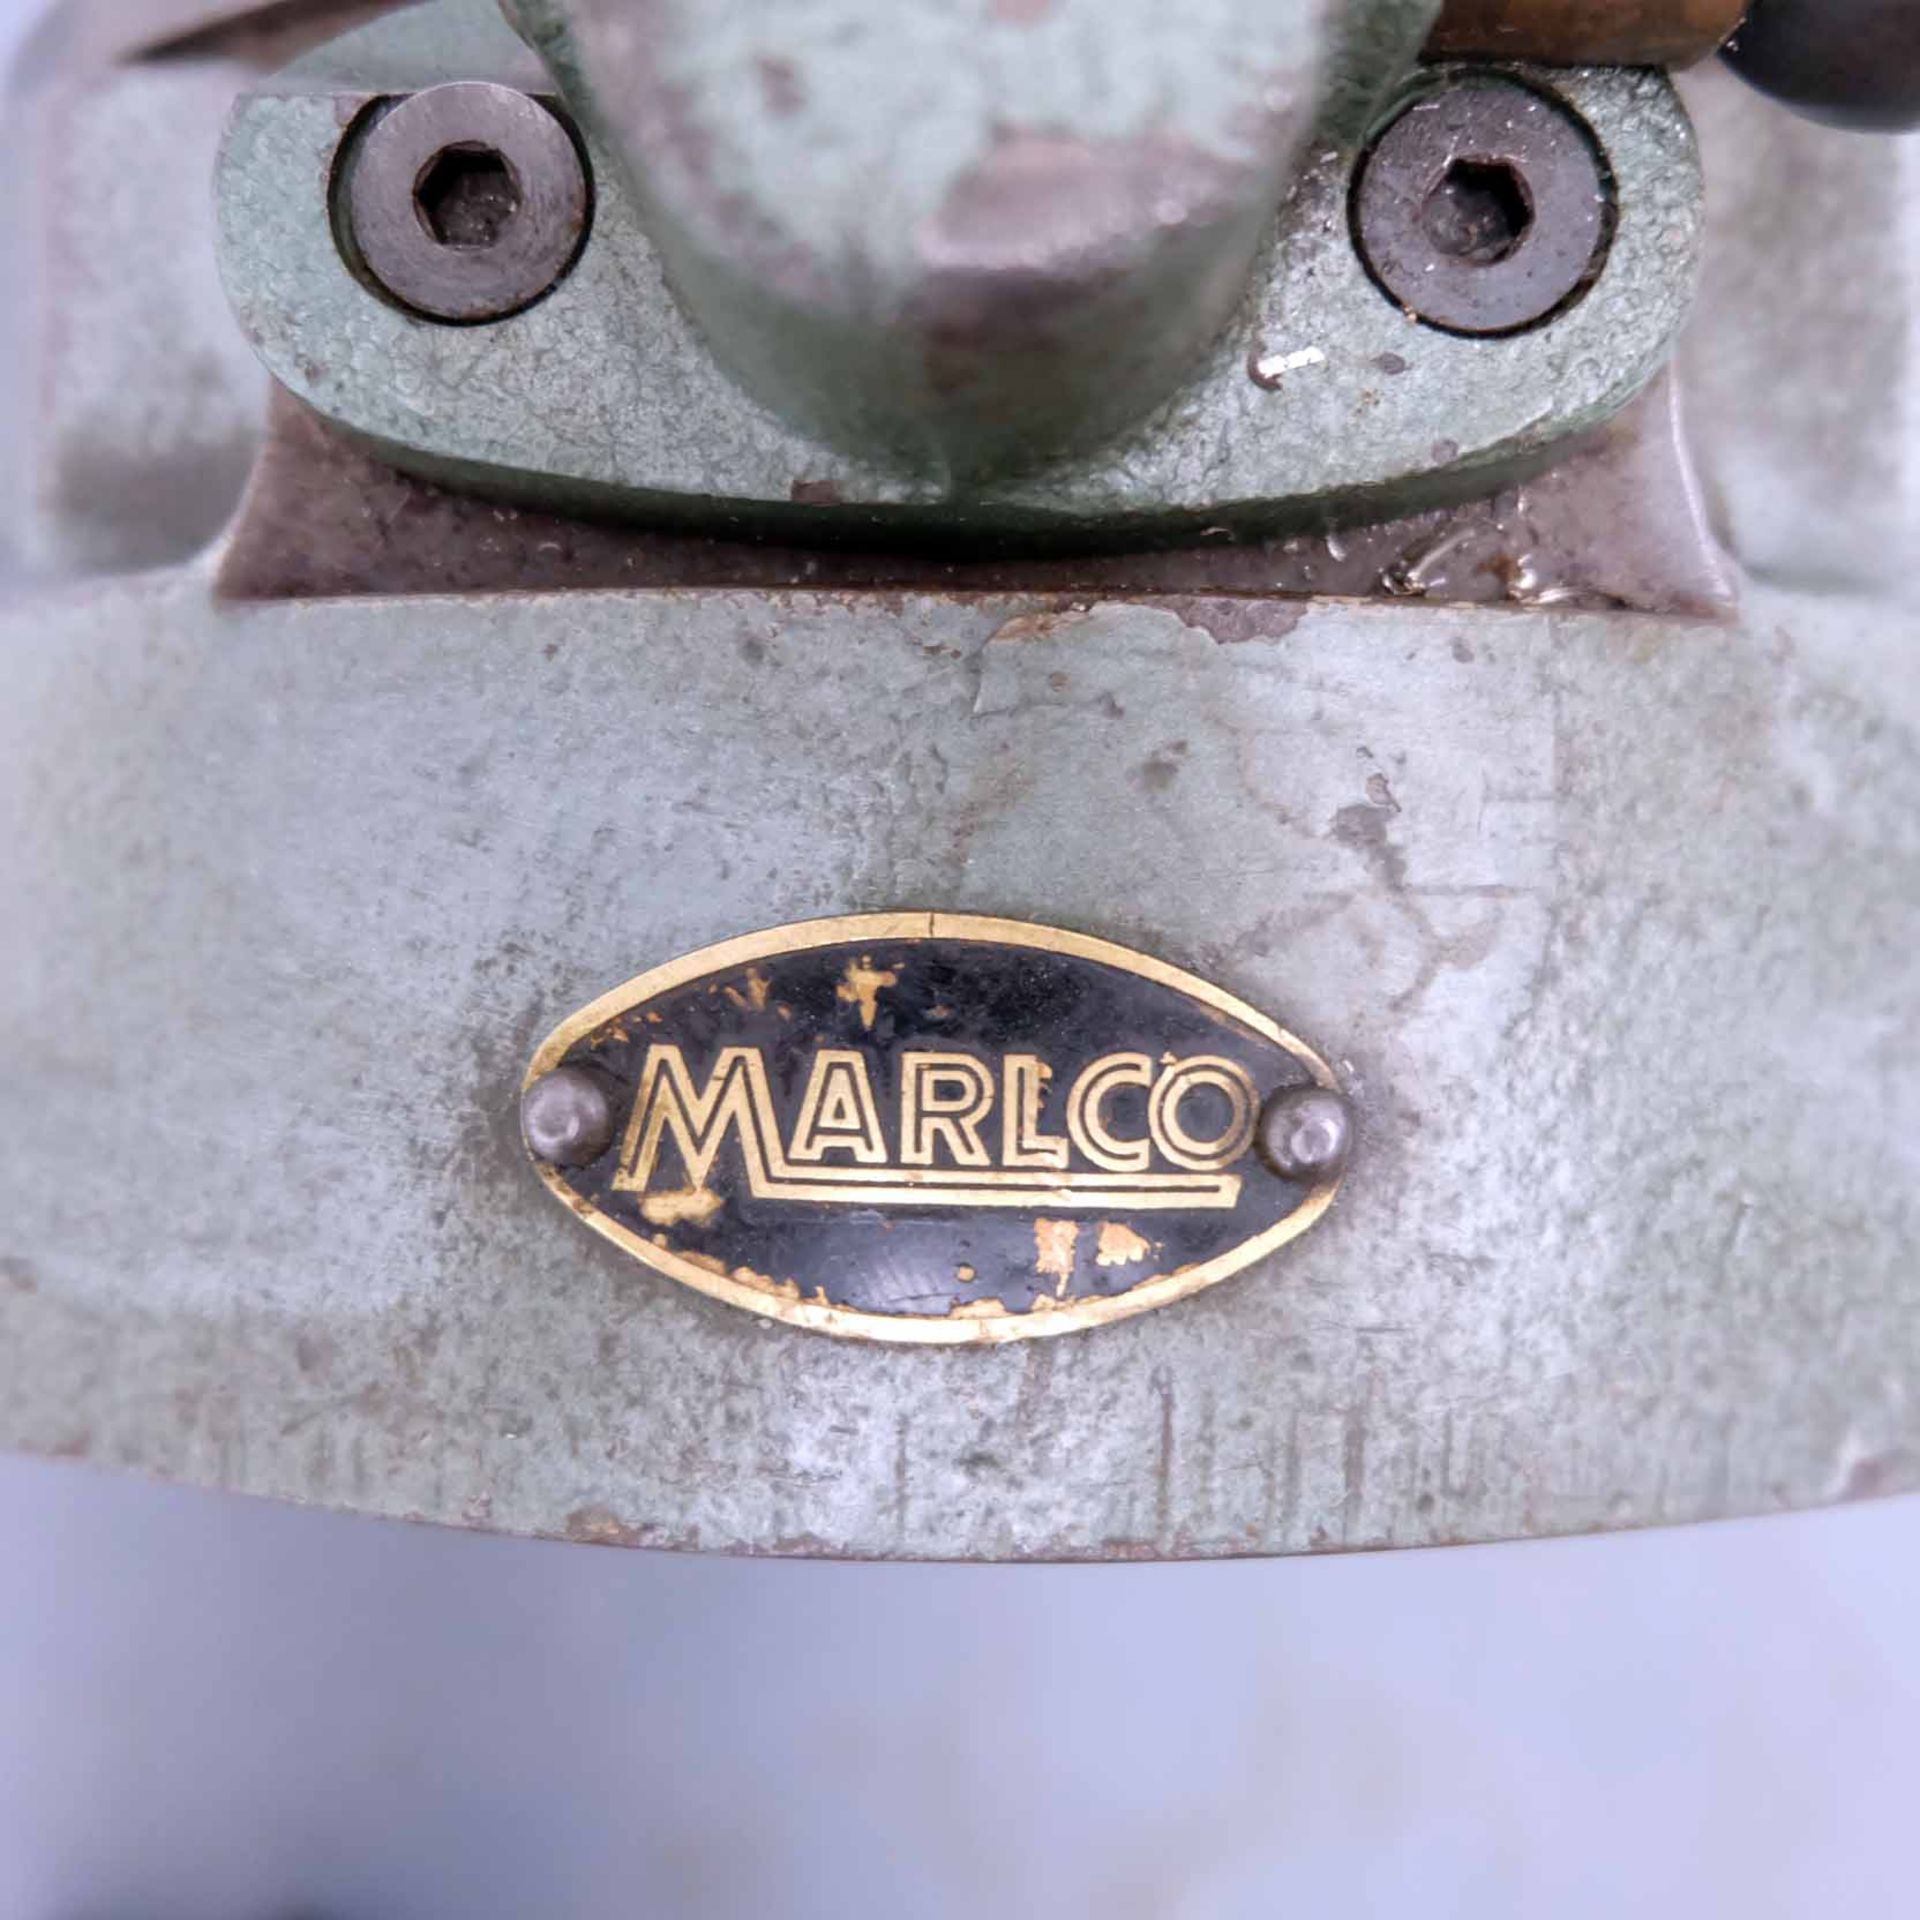 Marlco Horizontal / Vertical Indexing Head. With 5 1/4" 3 Jaw Chuck. - Image 6 of 7